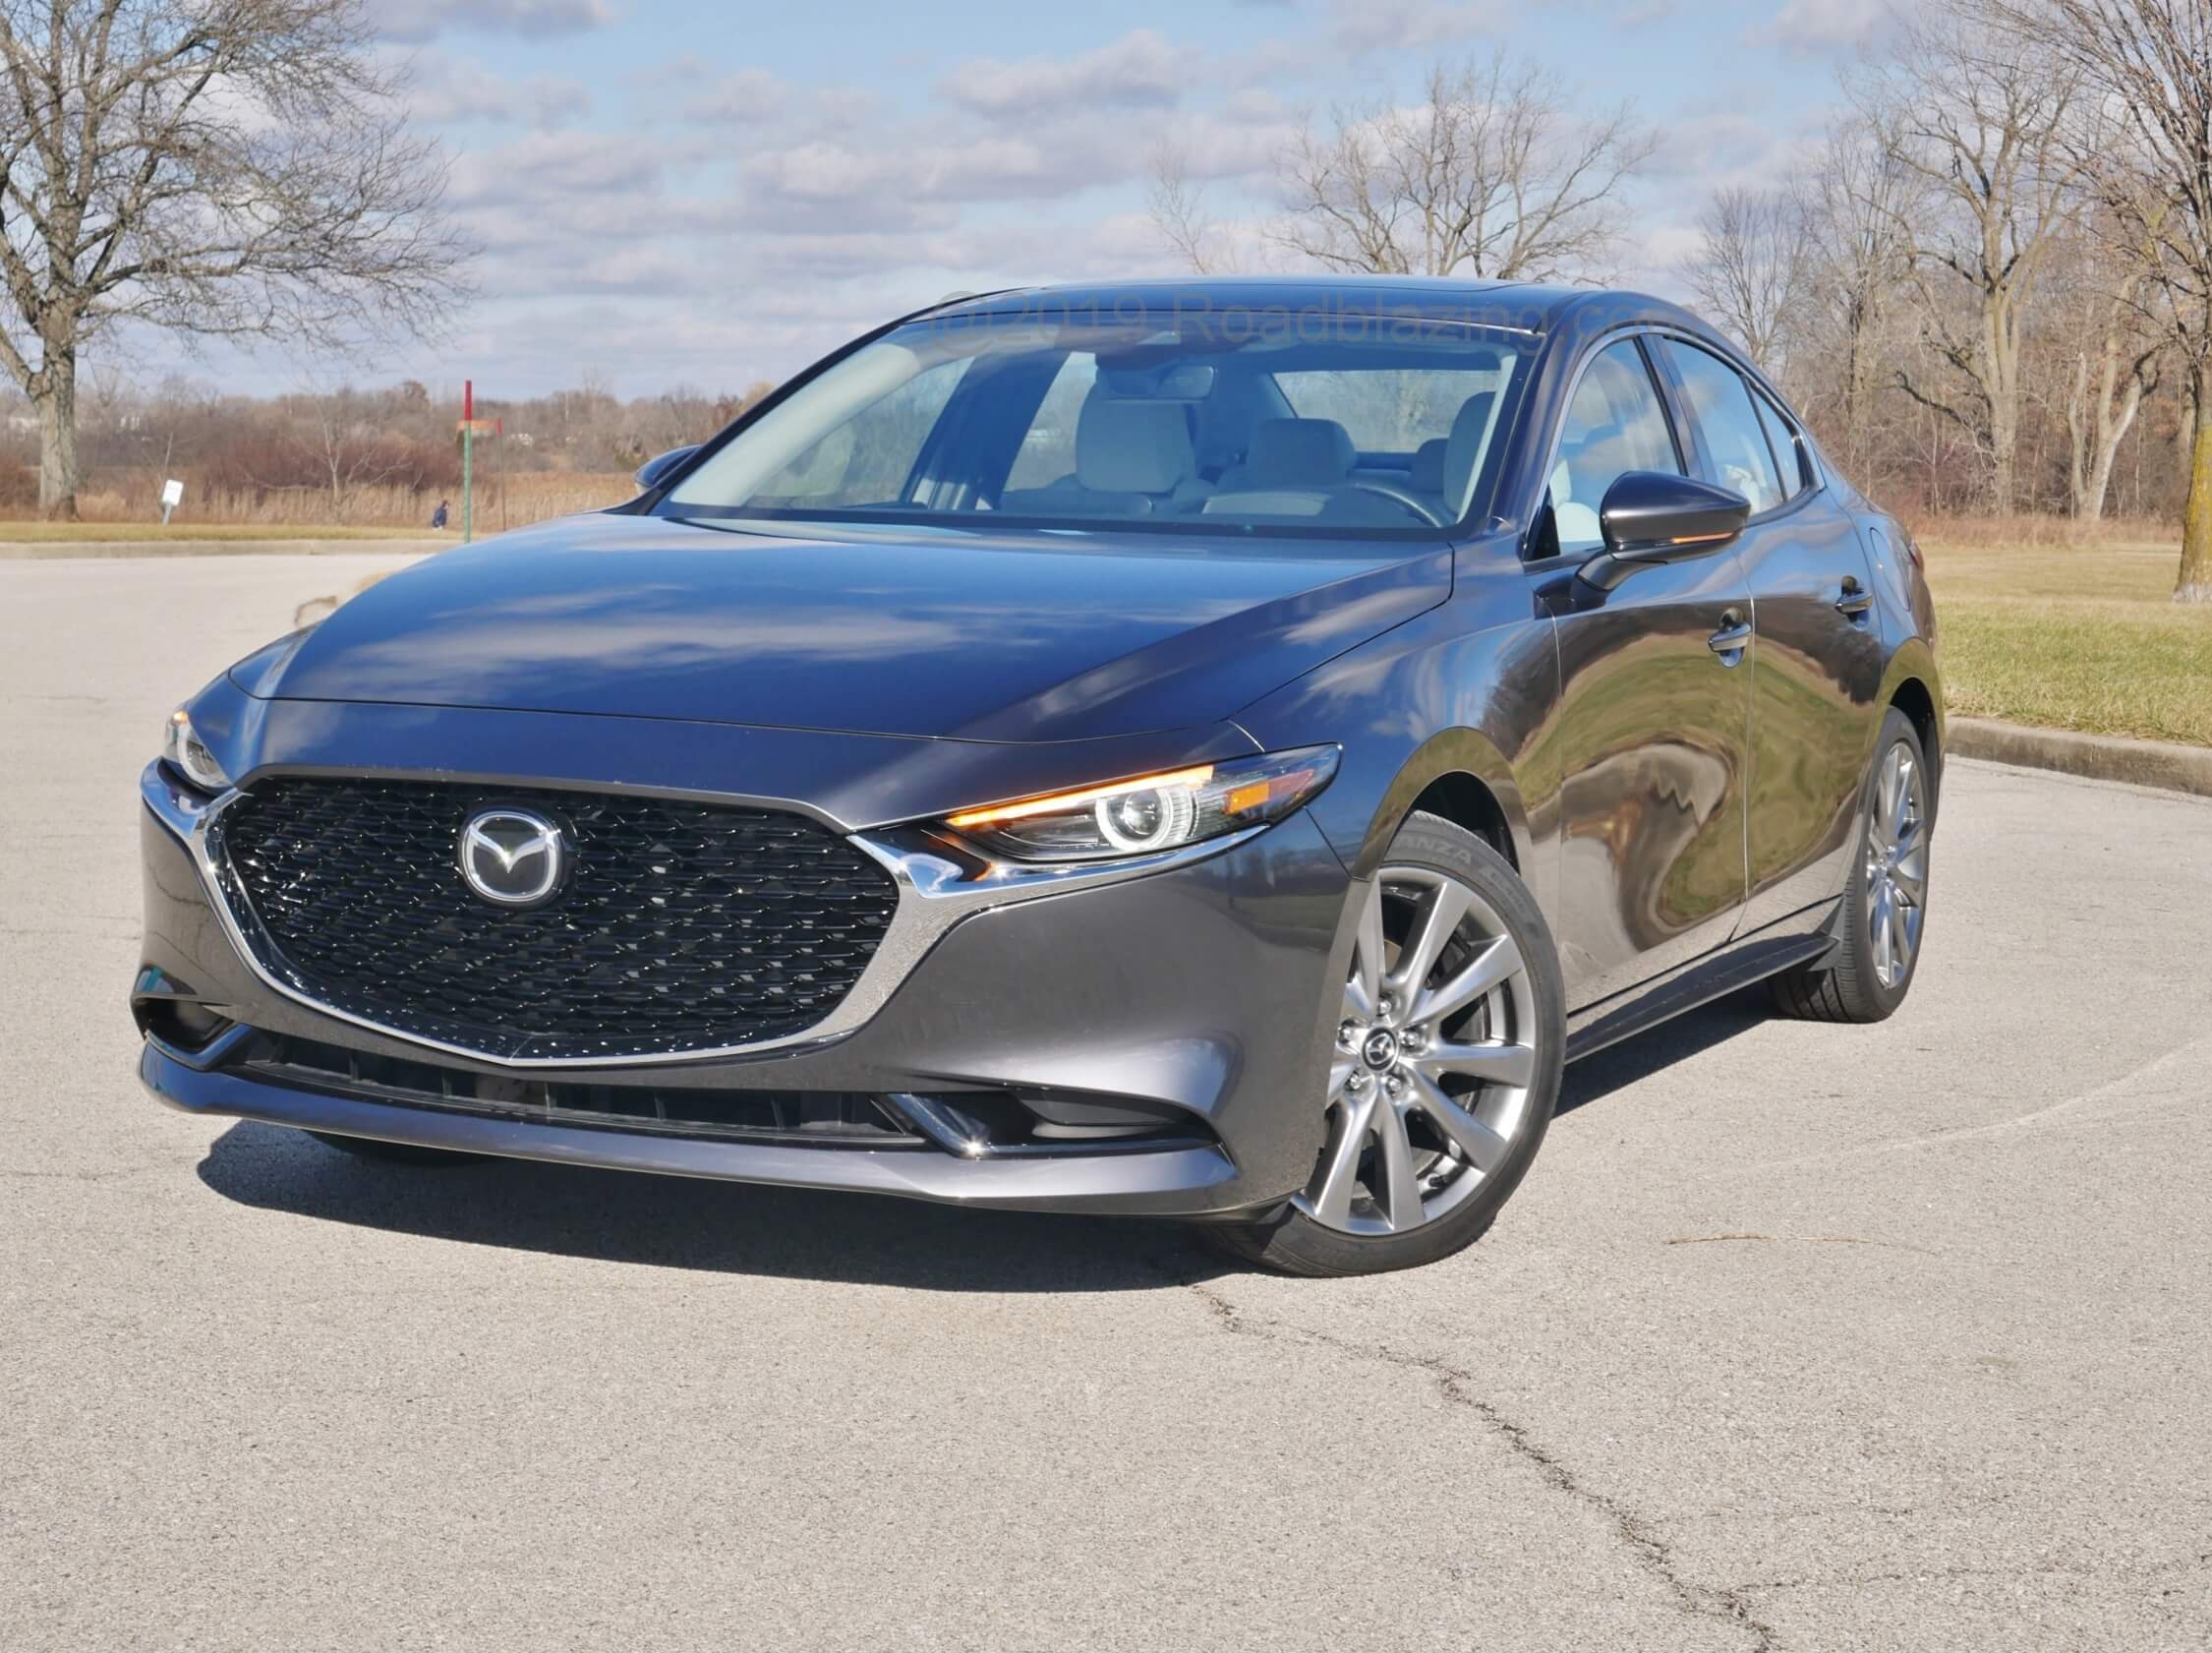 2020 Mazda 3 sedan awd premium: Straight outta Mazda 6 Signature, chrome arms from the shortened pentagonal grille lower bezel extends with arms cradling more drawn prominent amber upper DRL headlamps